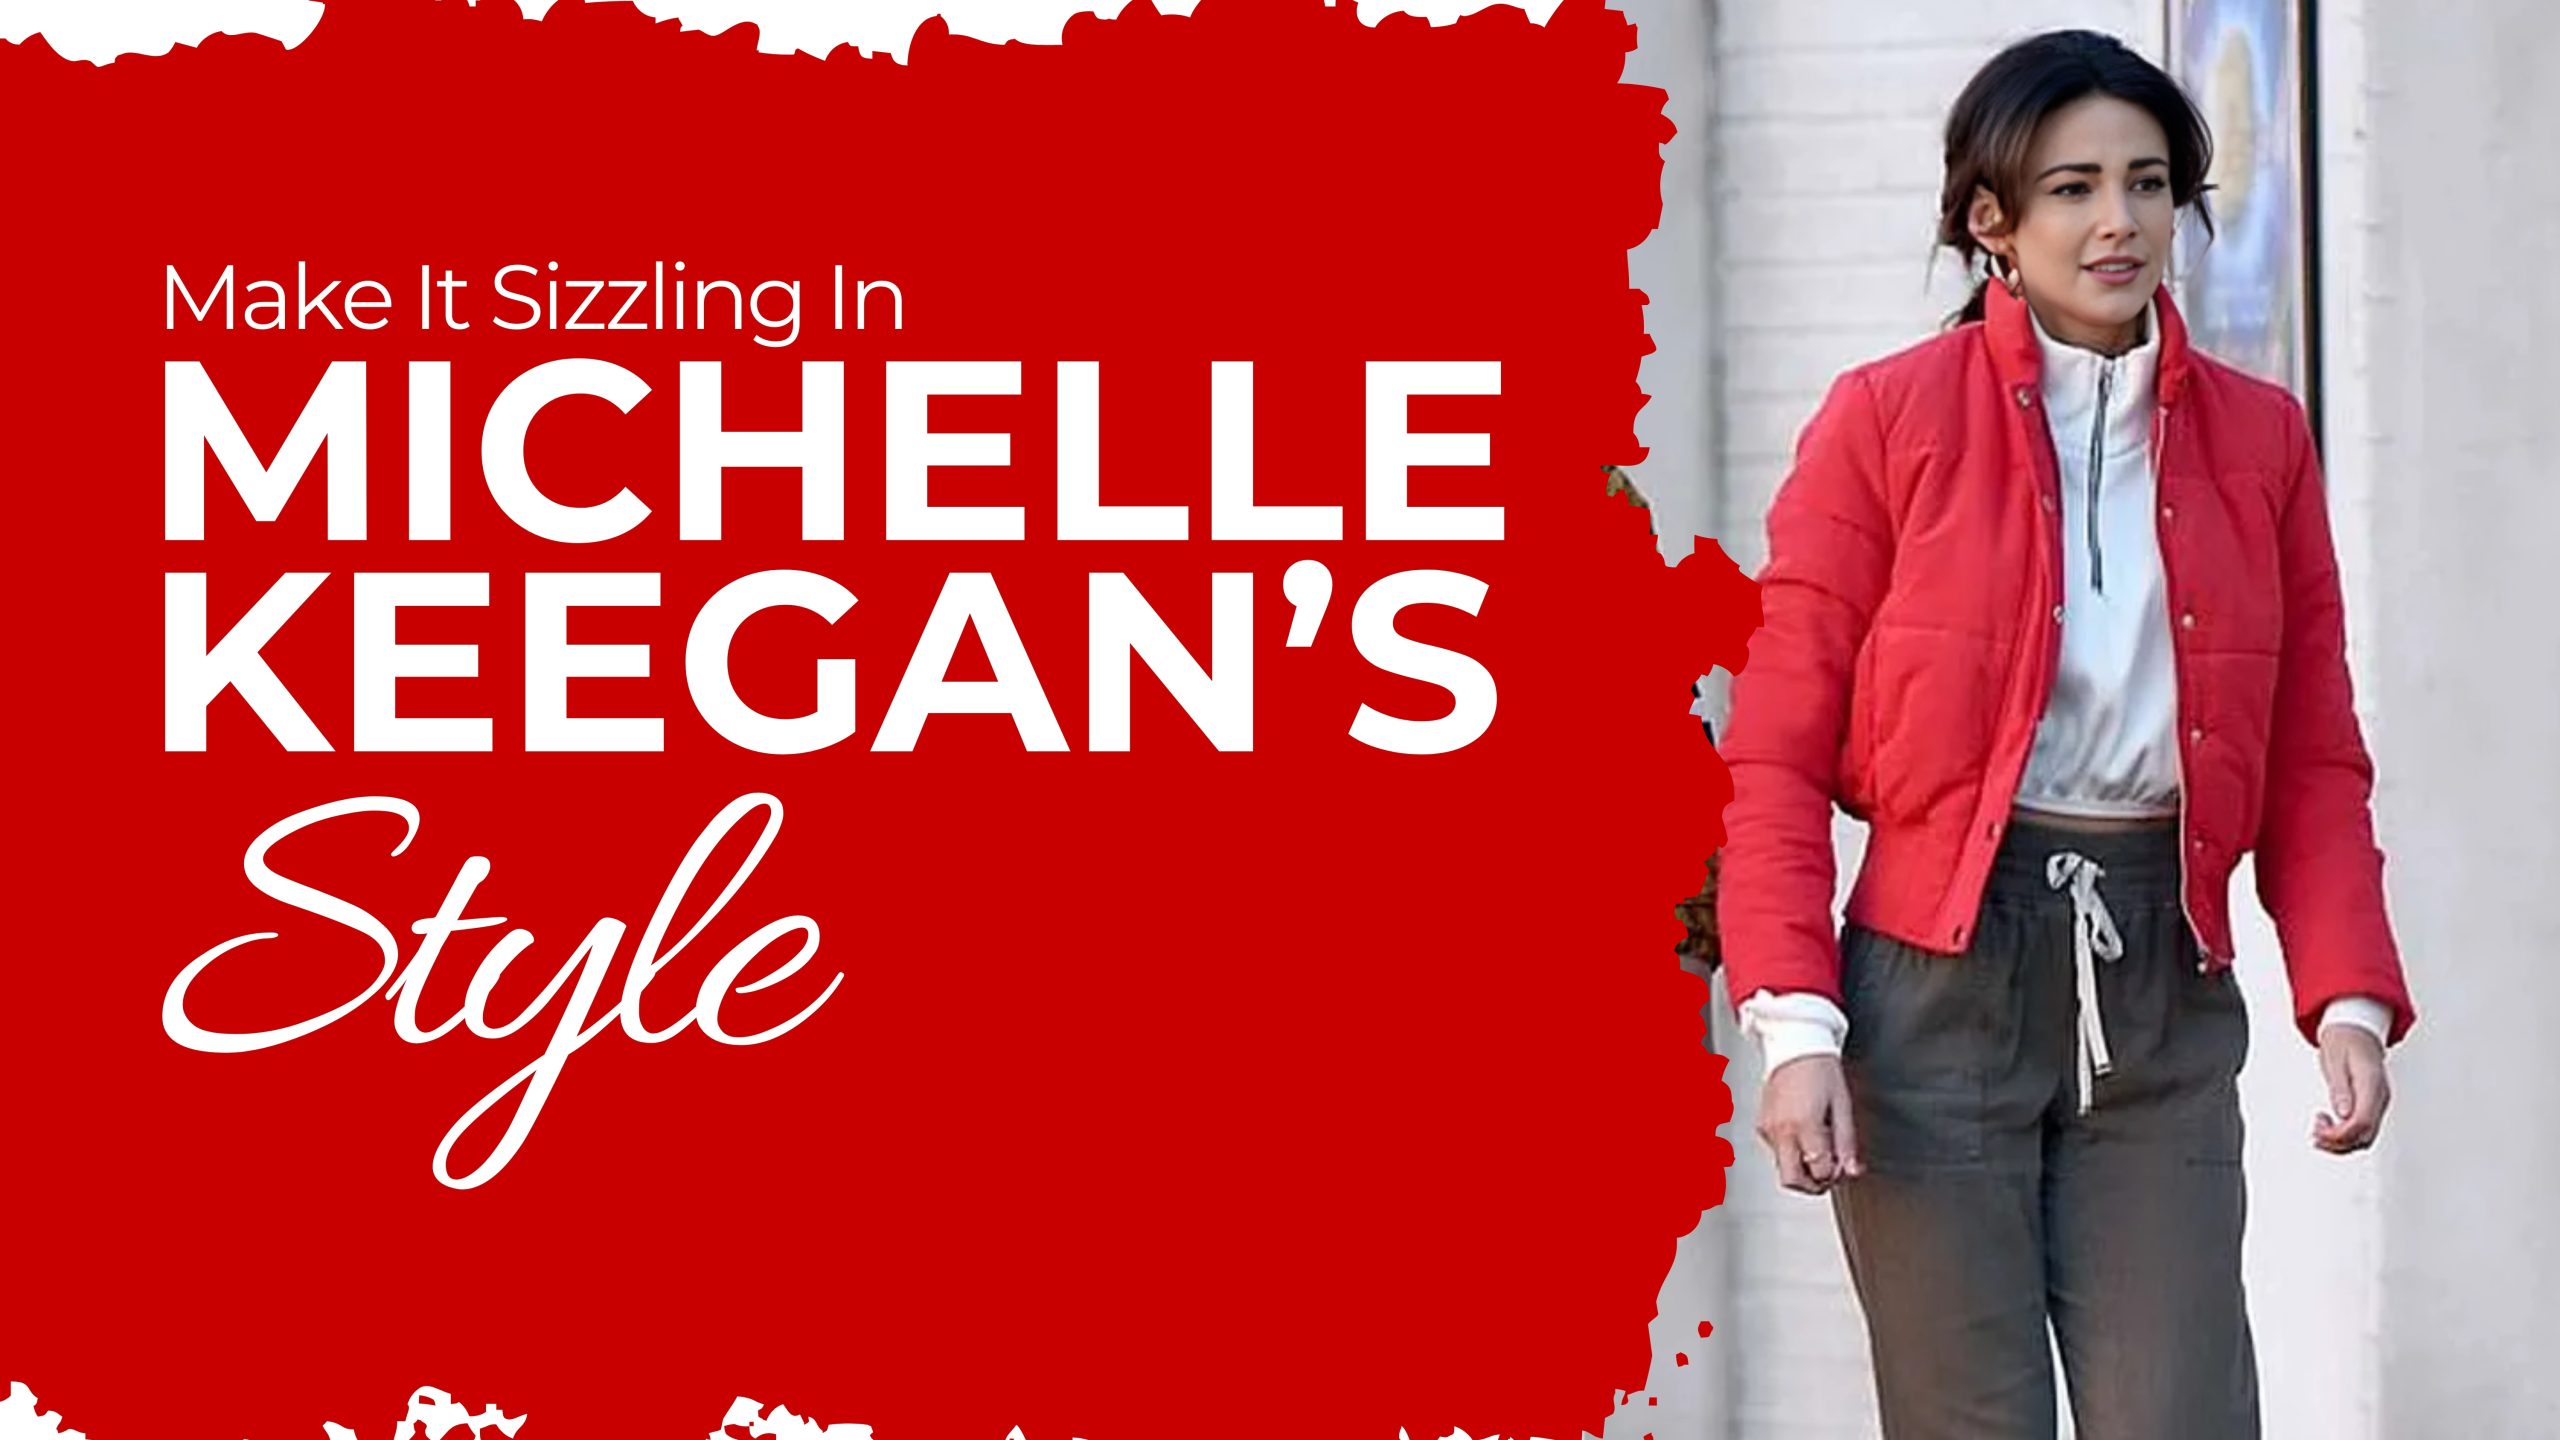 Make It Sizzling In Michelle Keegan’s Style